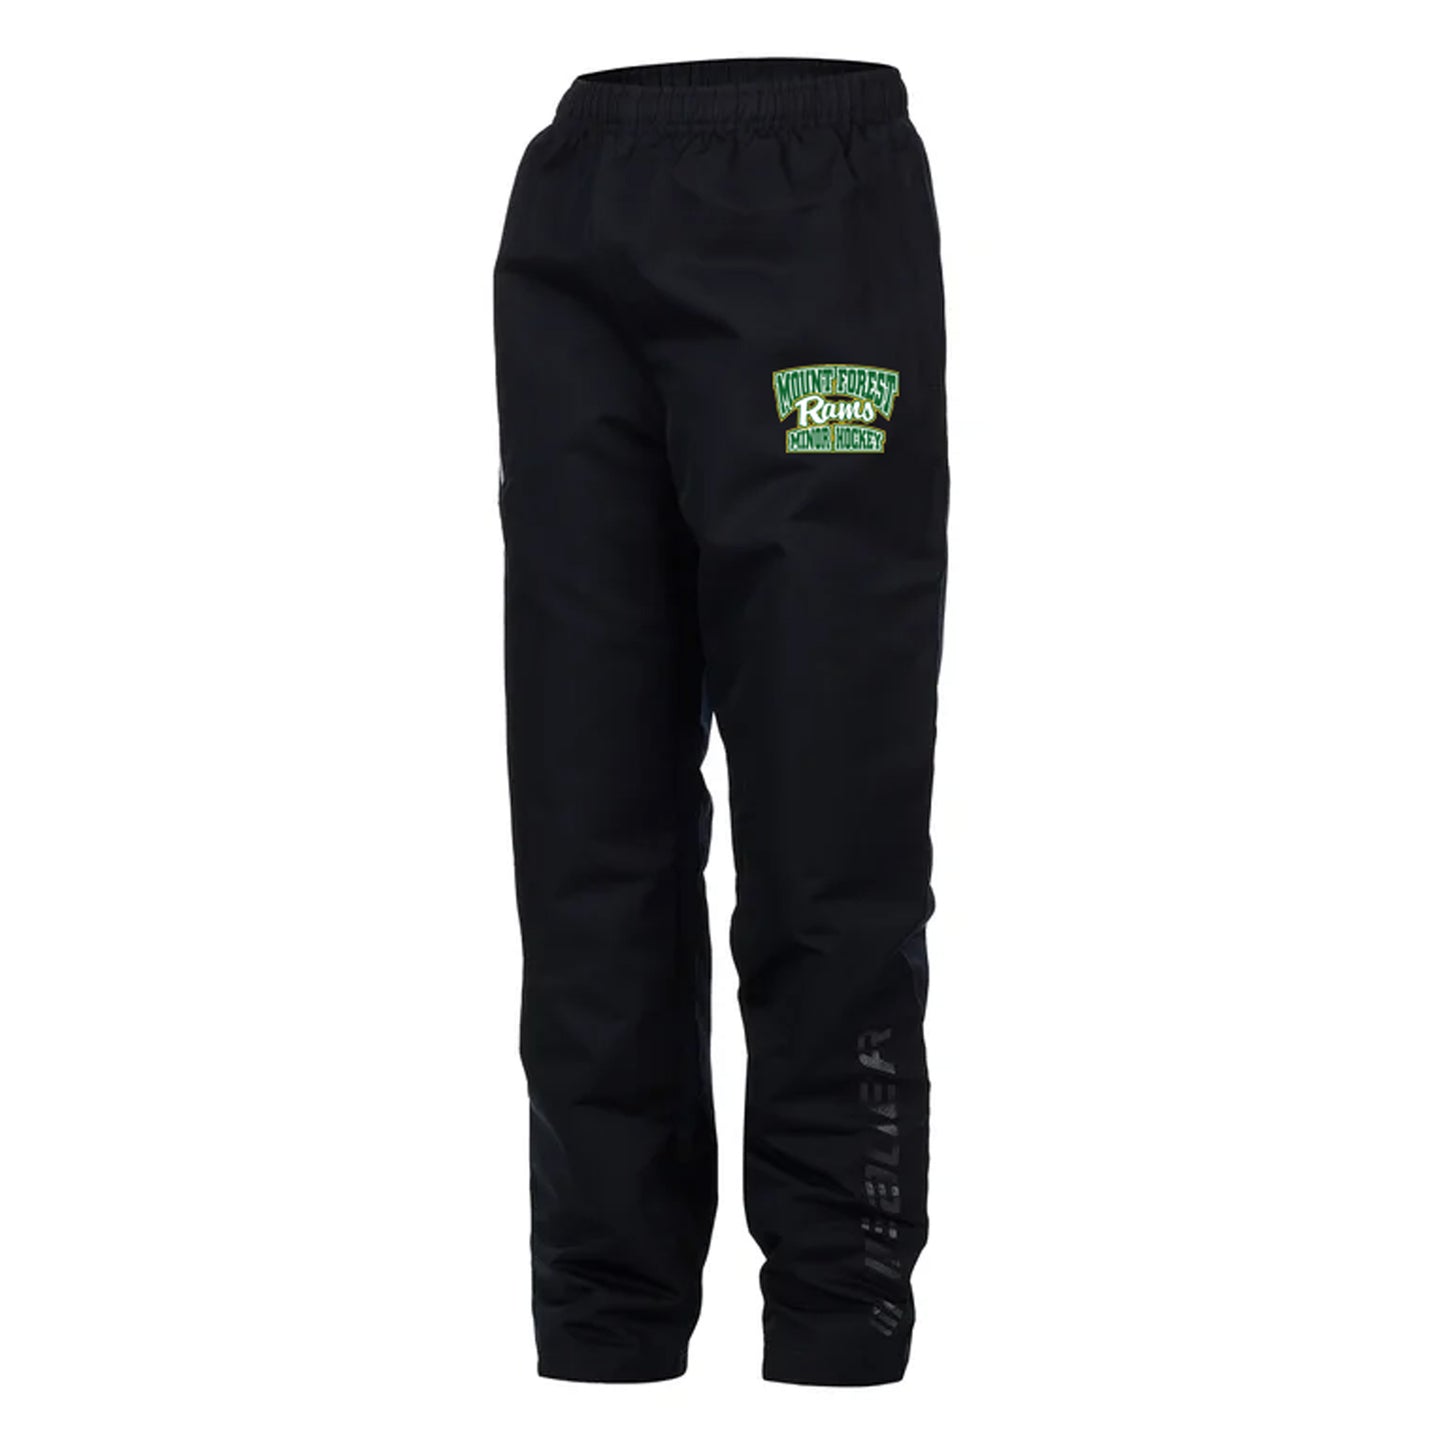 Bauer Pants | Youth